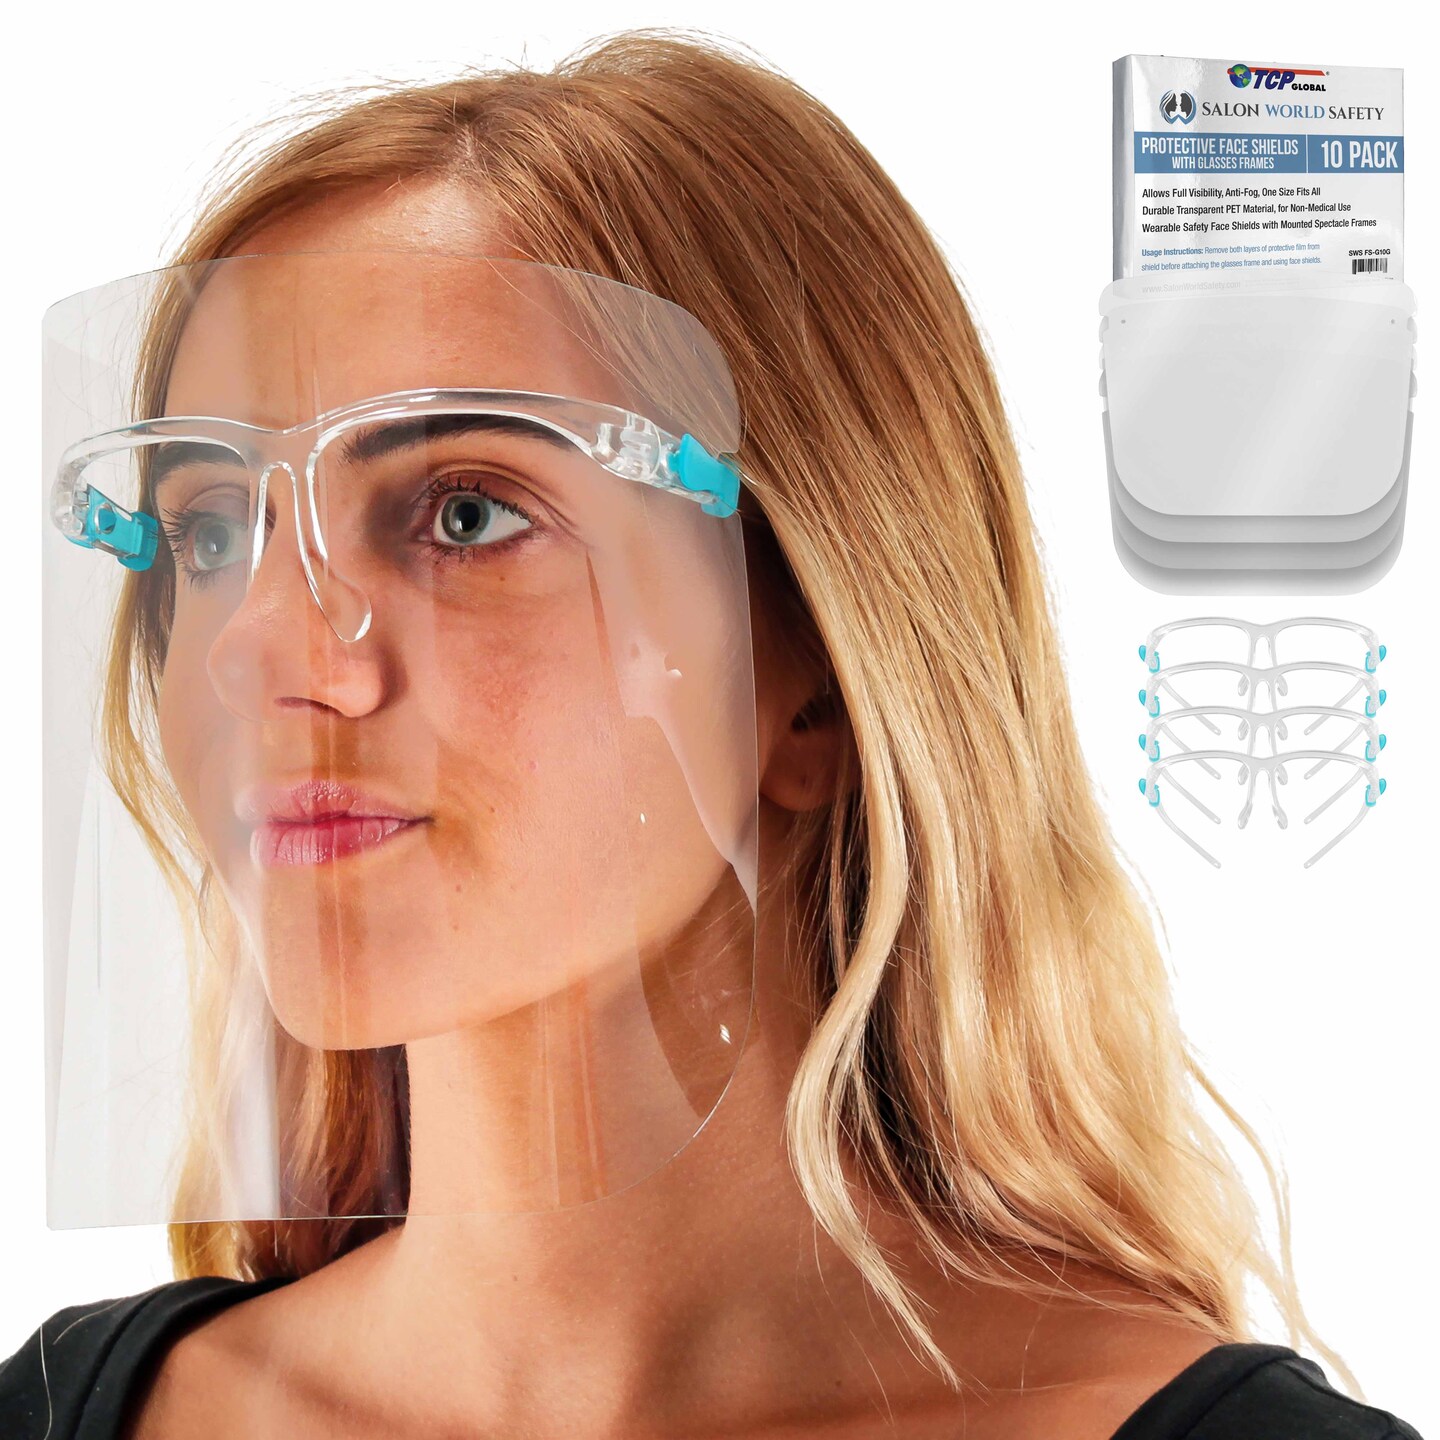 Safety Face Shields with Glasses Frames (Pack of 10) - Ultra Clear Protective Full Face Shields to Protect Eyes, Nose, Mouth - Anti-Fog PET Plastic